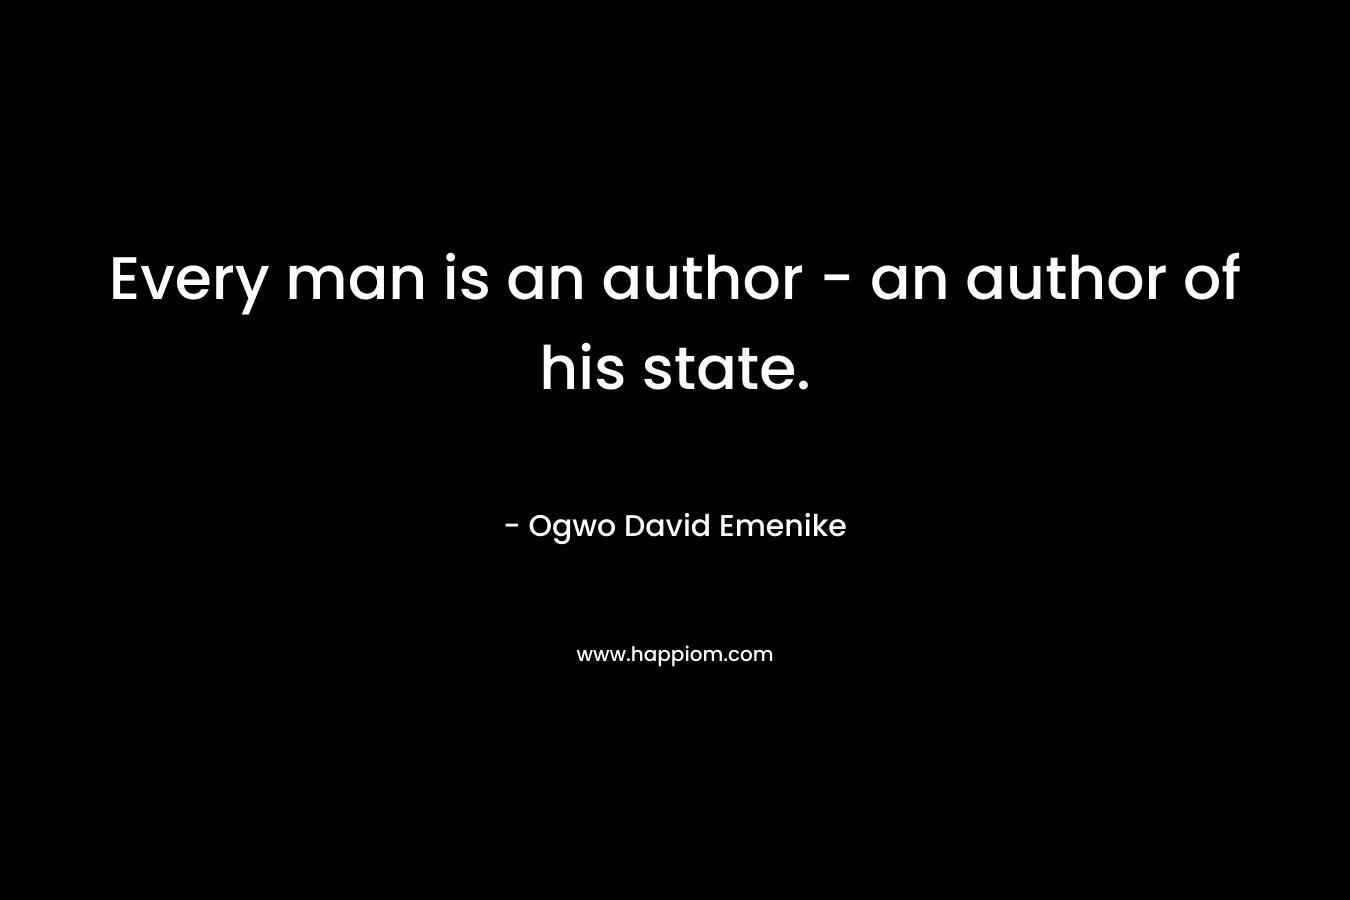 Every man is an author - an author of his state.